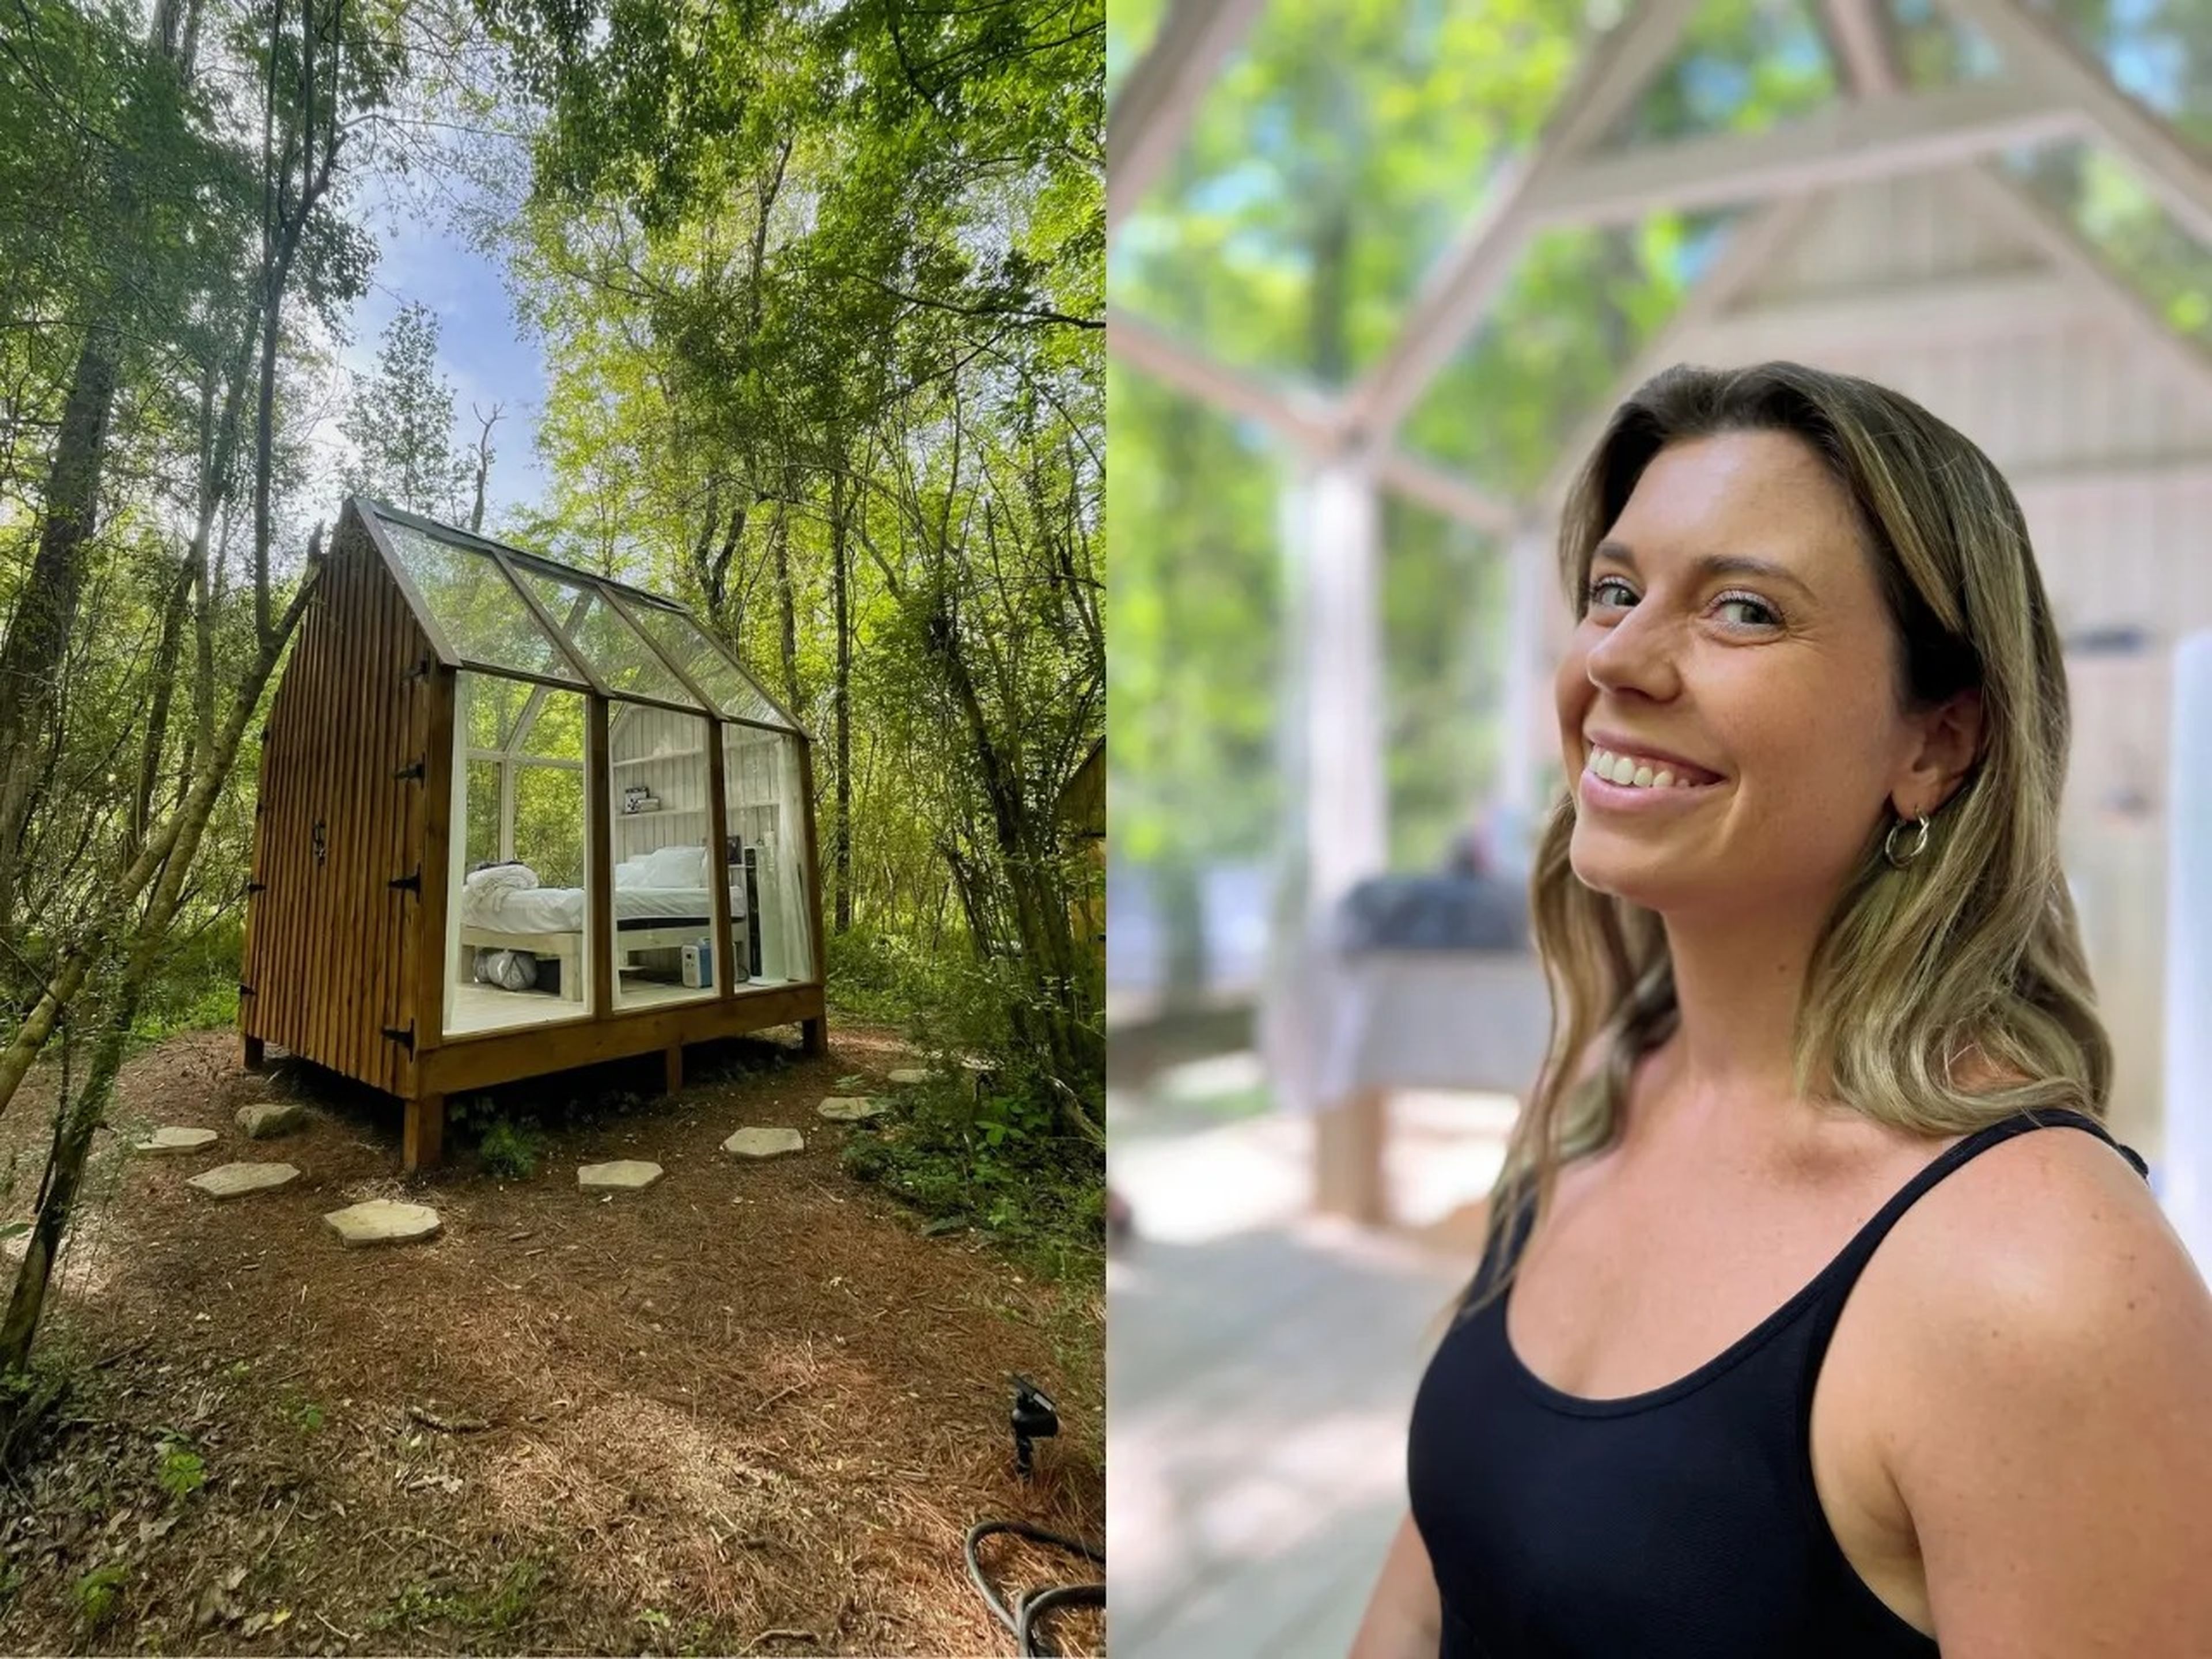 Side-by-side photos of a tiny glass house Airbnb and its owner, Rachel Boice.